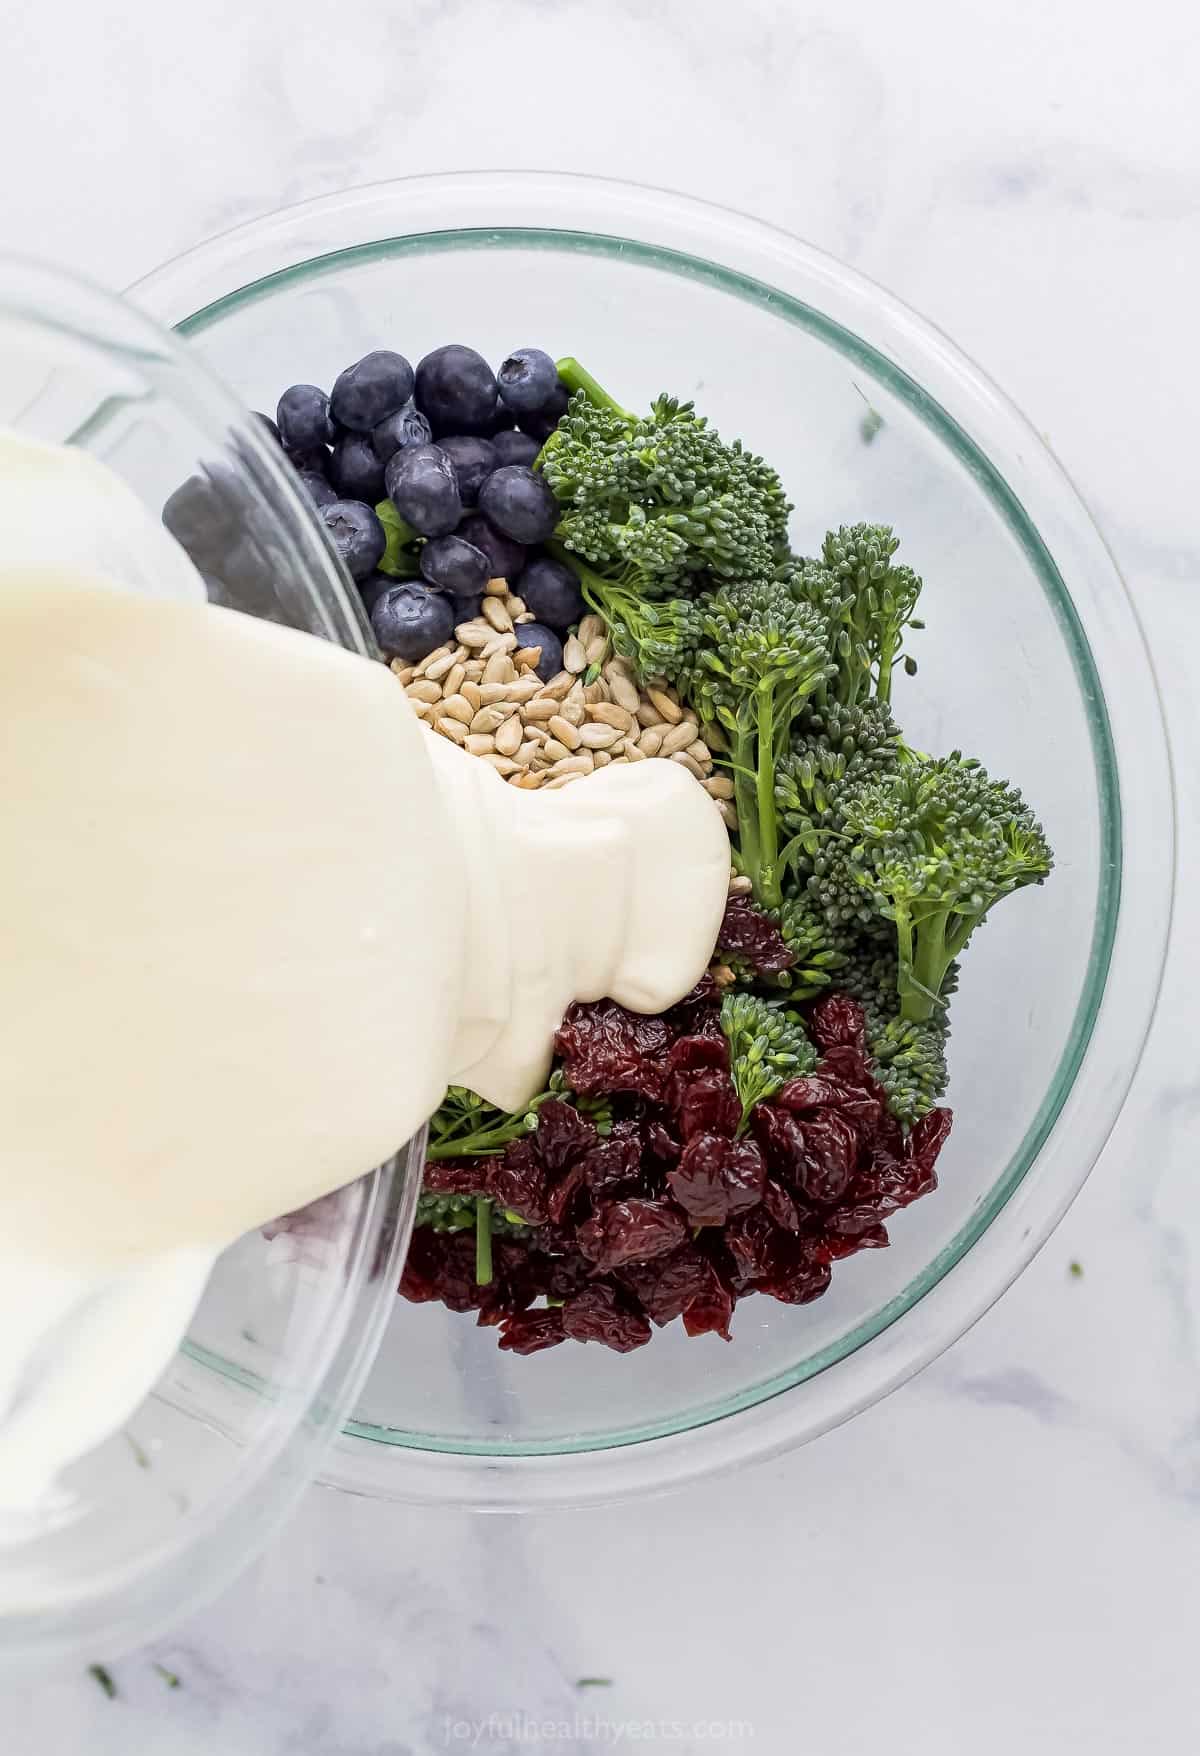 The yogurt dressing being poured over the bowl of broccolini salad ingredients